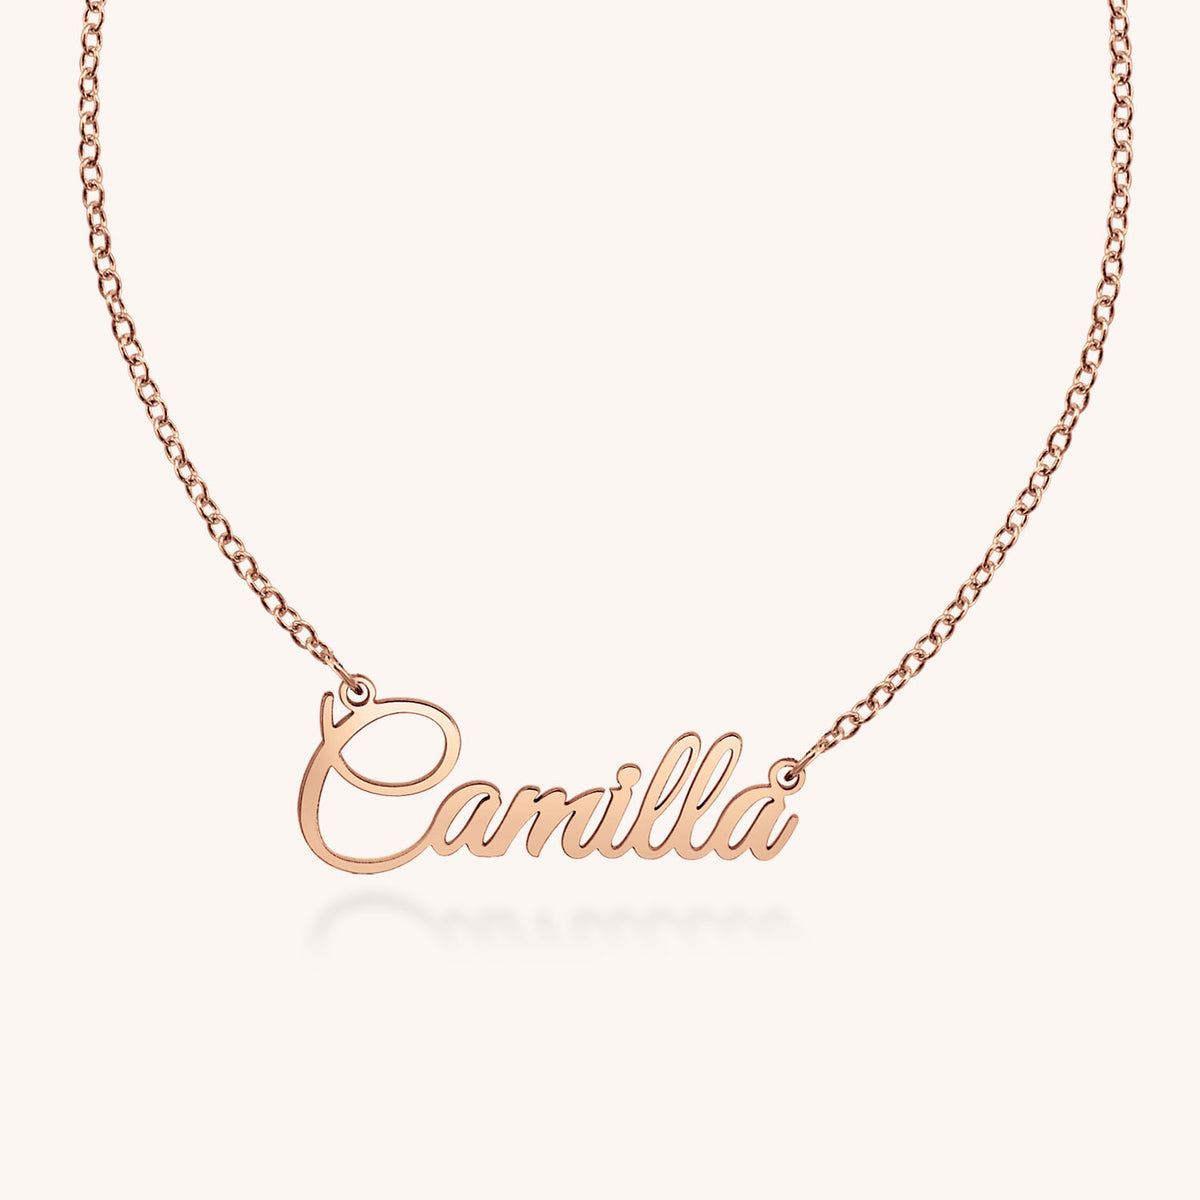 Camilla Nameplate Necklace